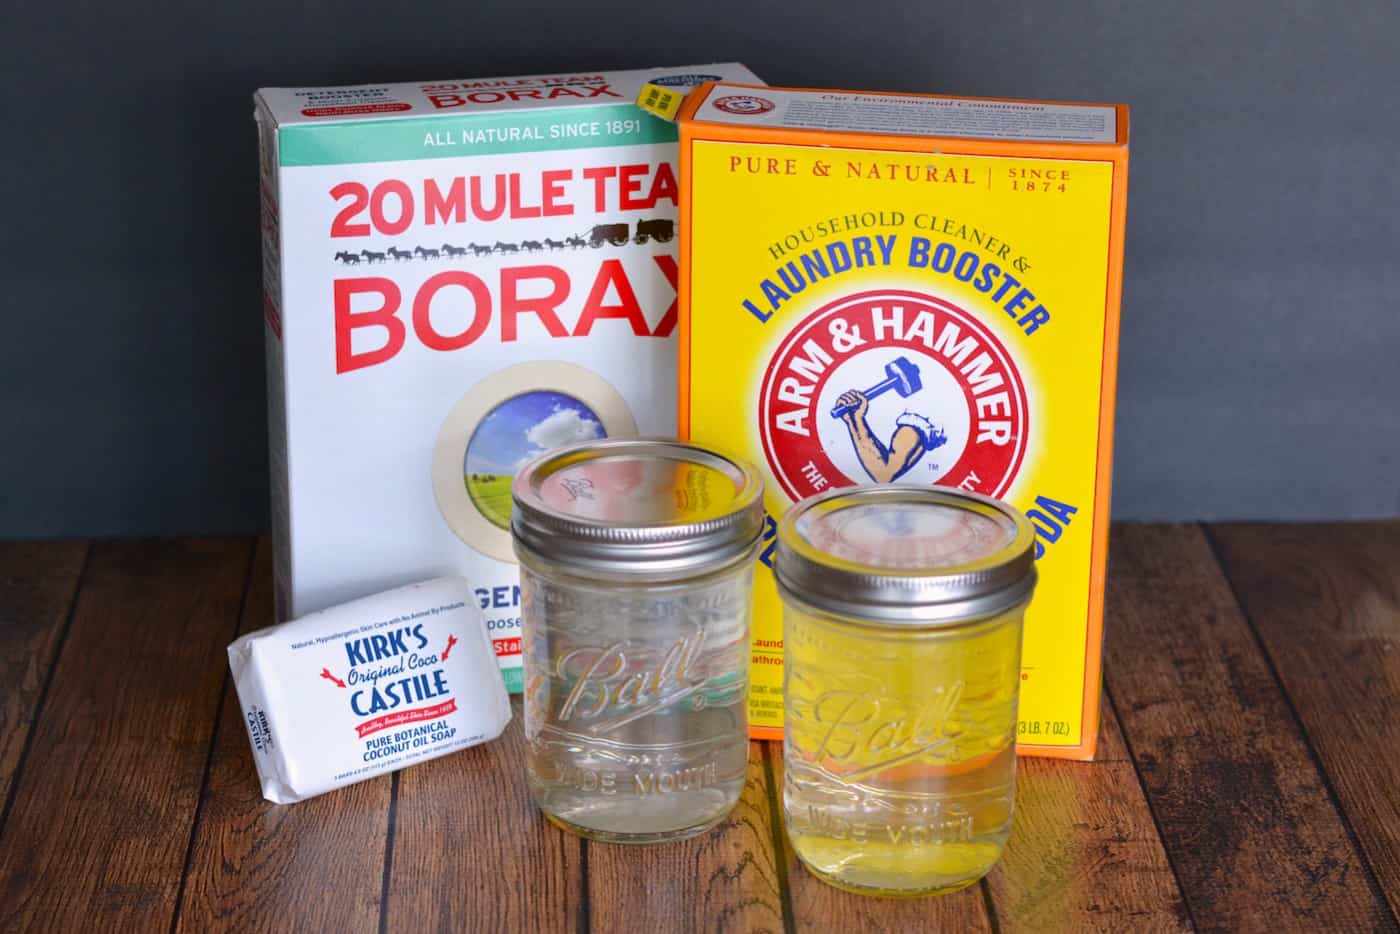 20 Mule team borax, laundry booster, Kirk's castile soap, and liquid laundry detergent in mason jars